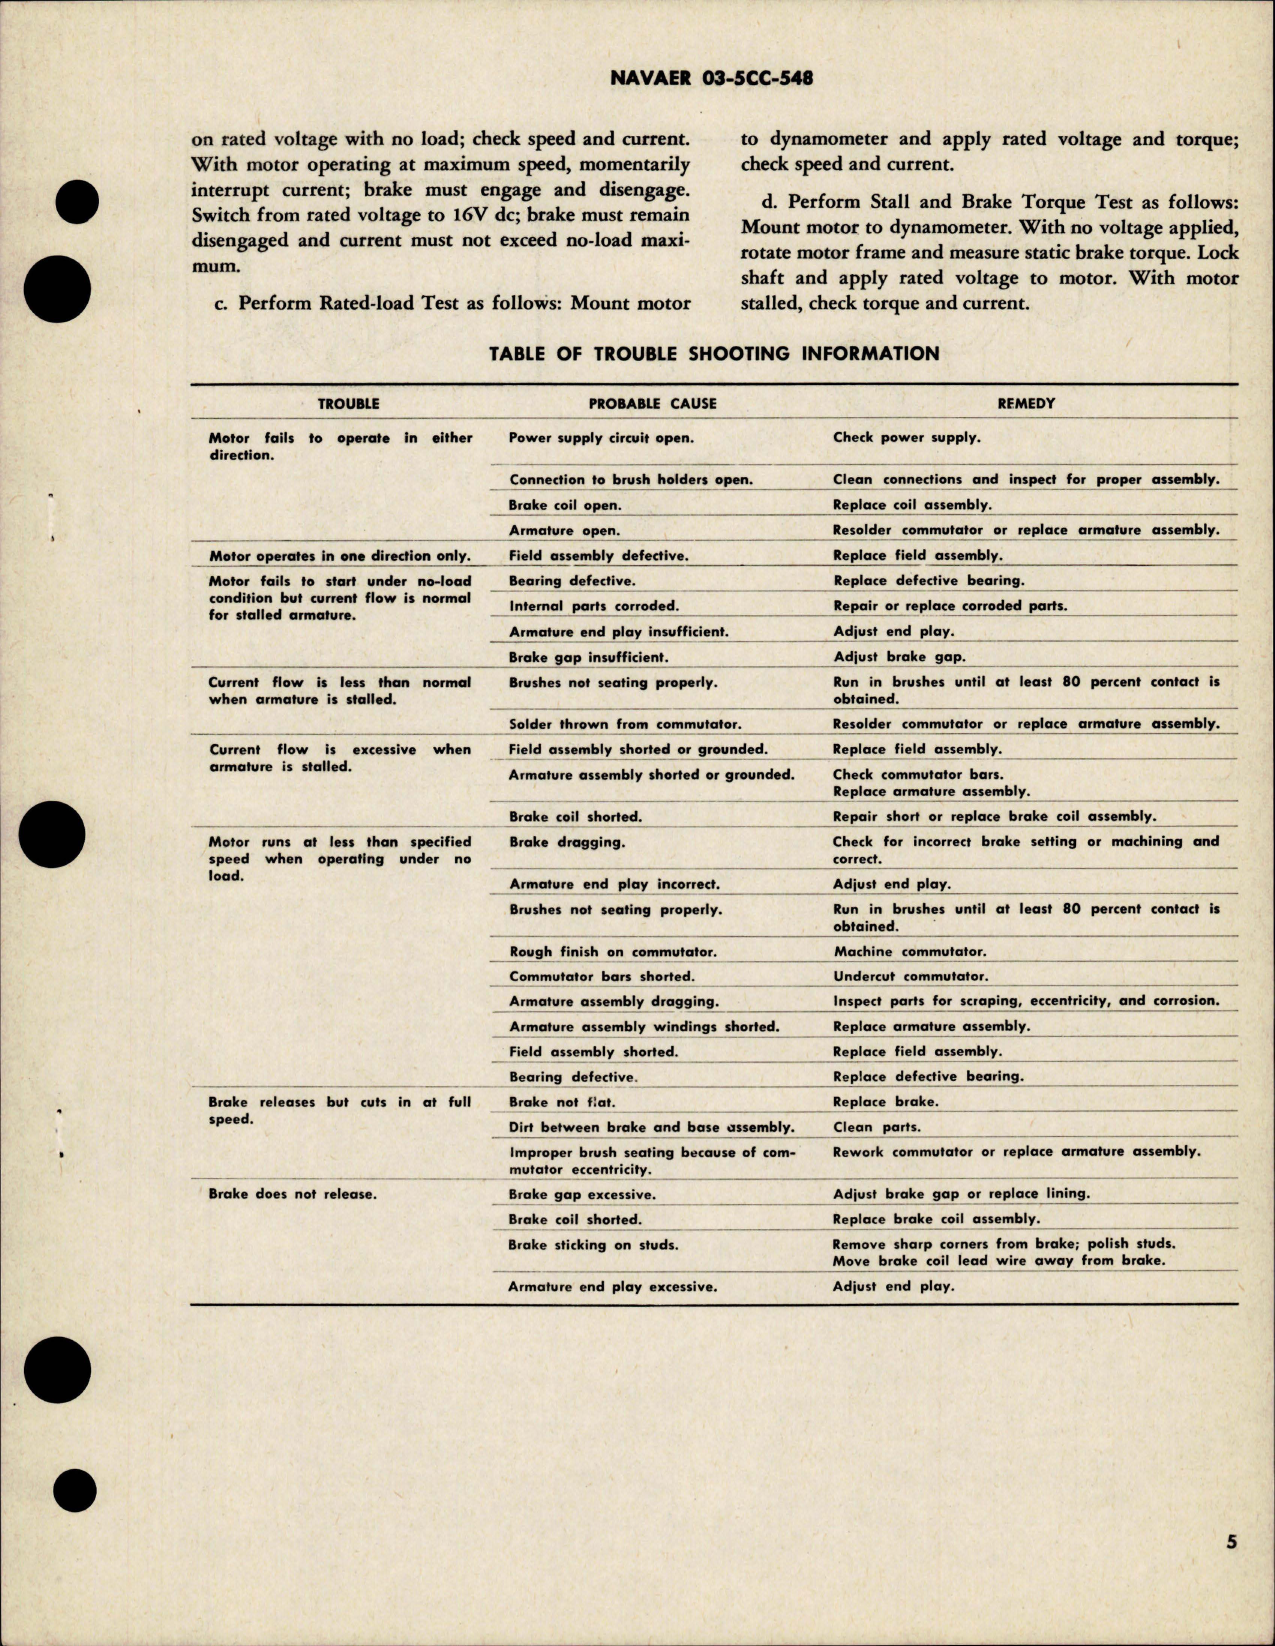 Sample page 5 from AirCorps Library document: Overhaul Instructions with Parts Breakdown for Direct Current Motor - Part 26968 